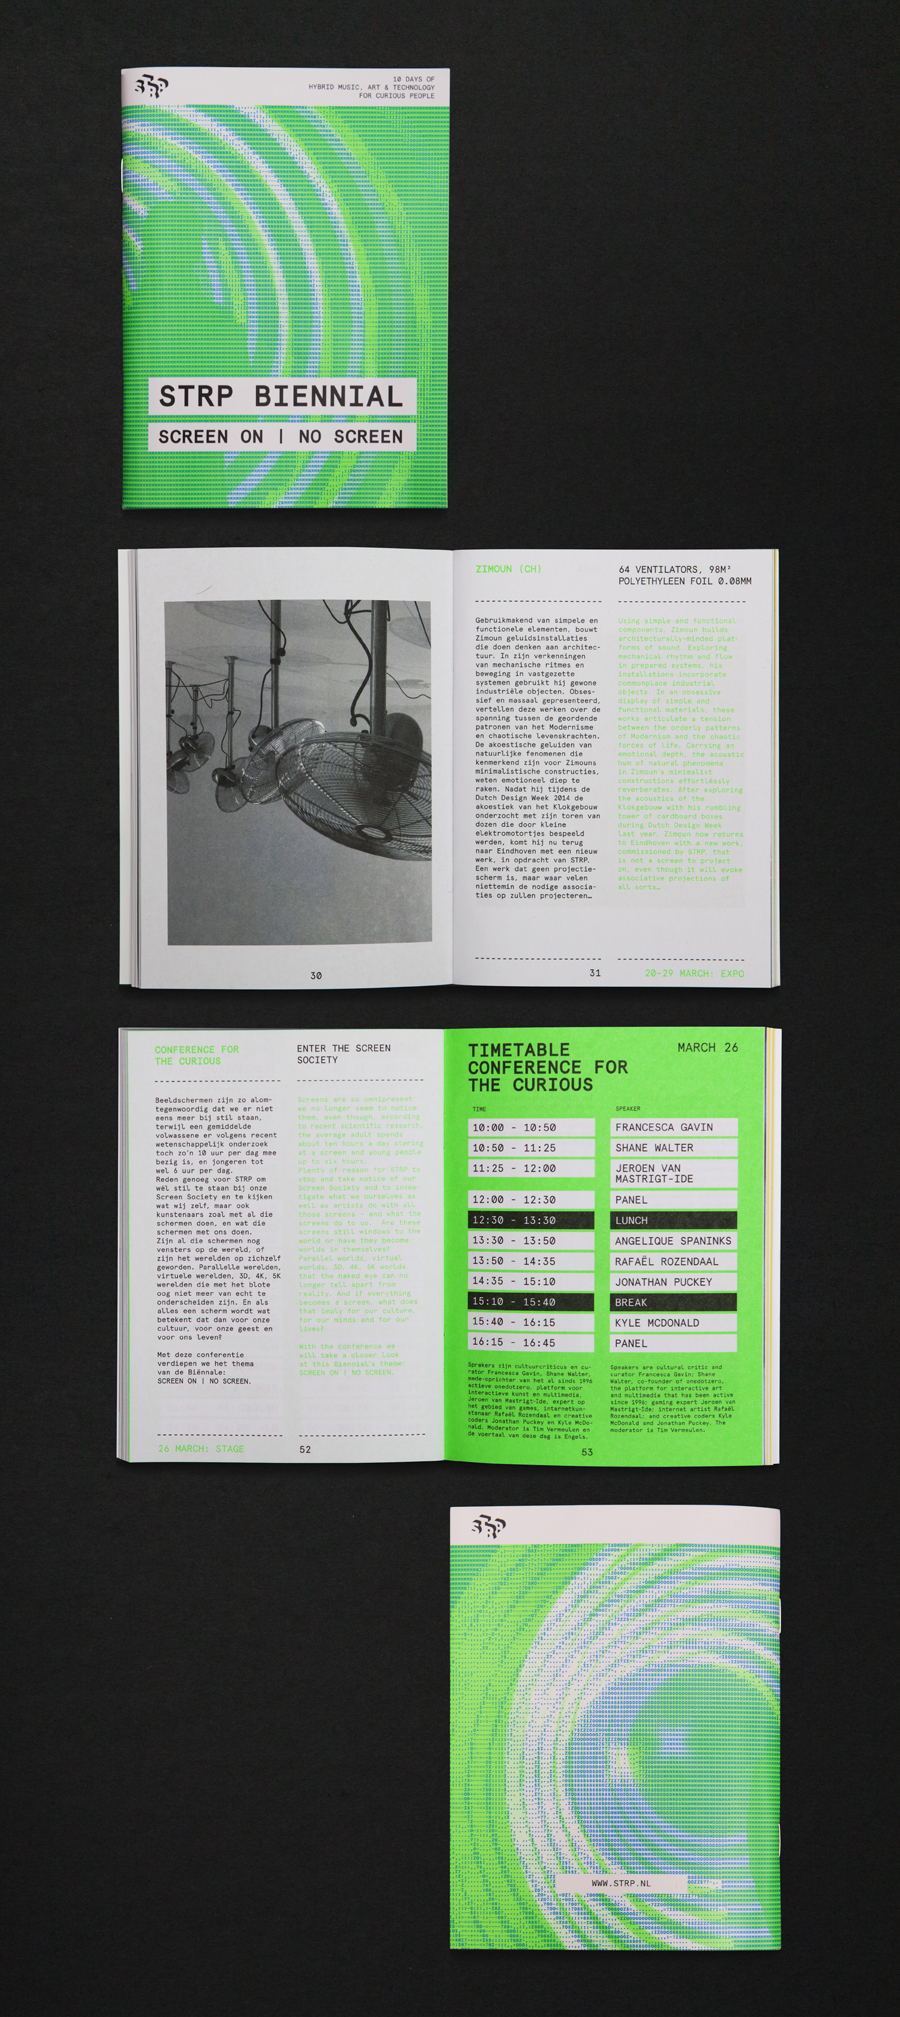 Print by graphic design studio Raw Color for Dutch art, technology and experimental pop culture festival STRP 2015.